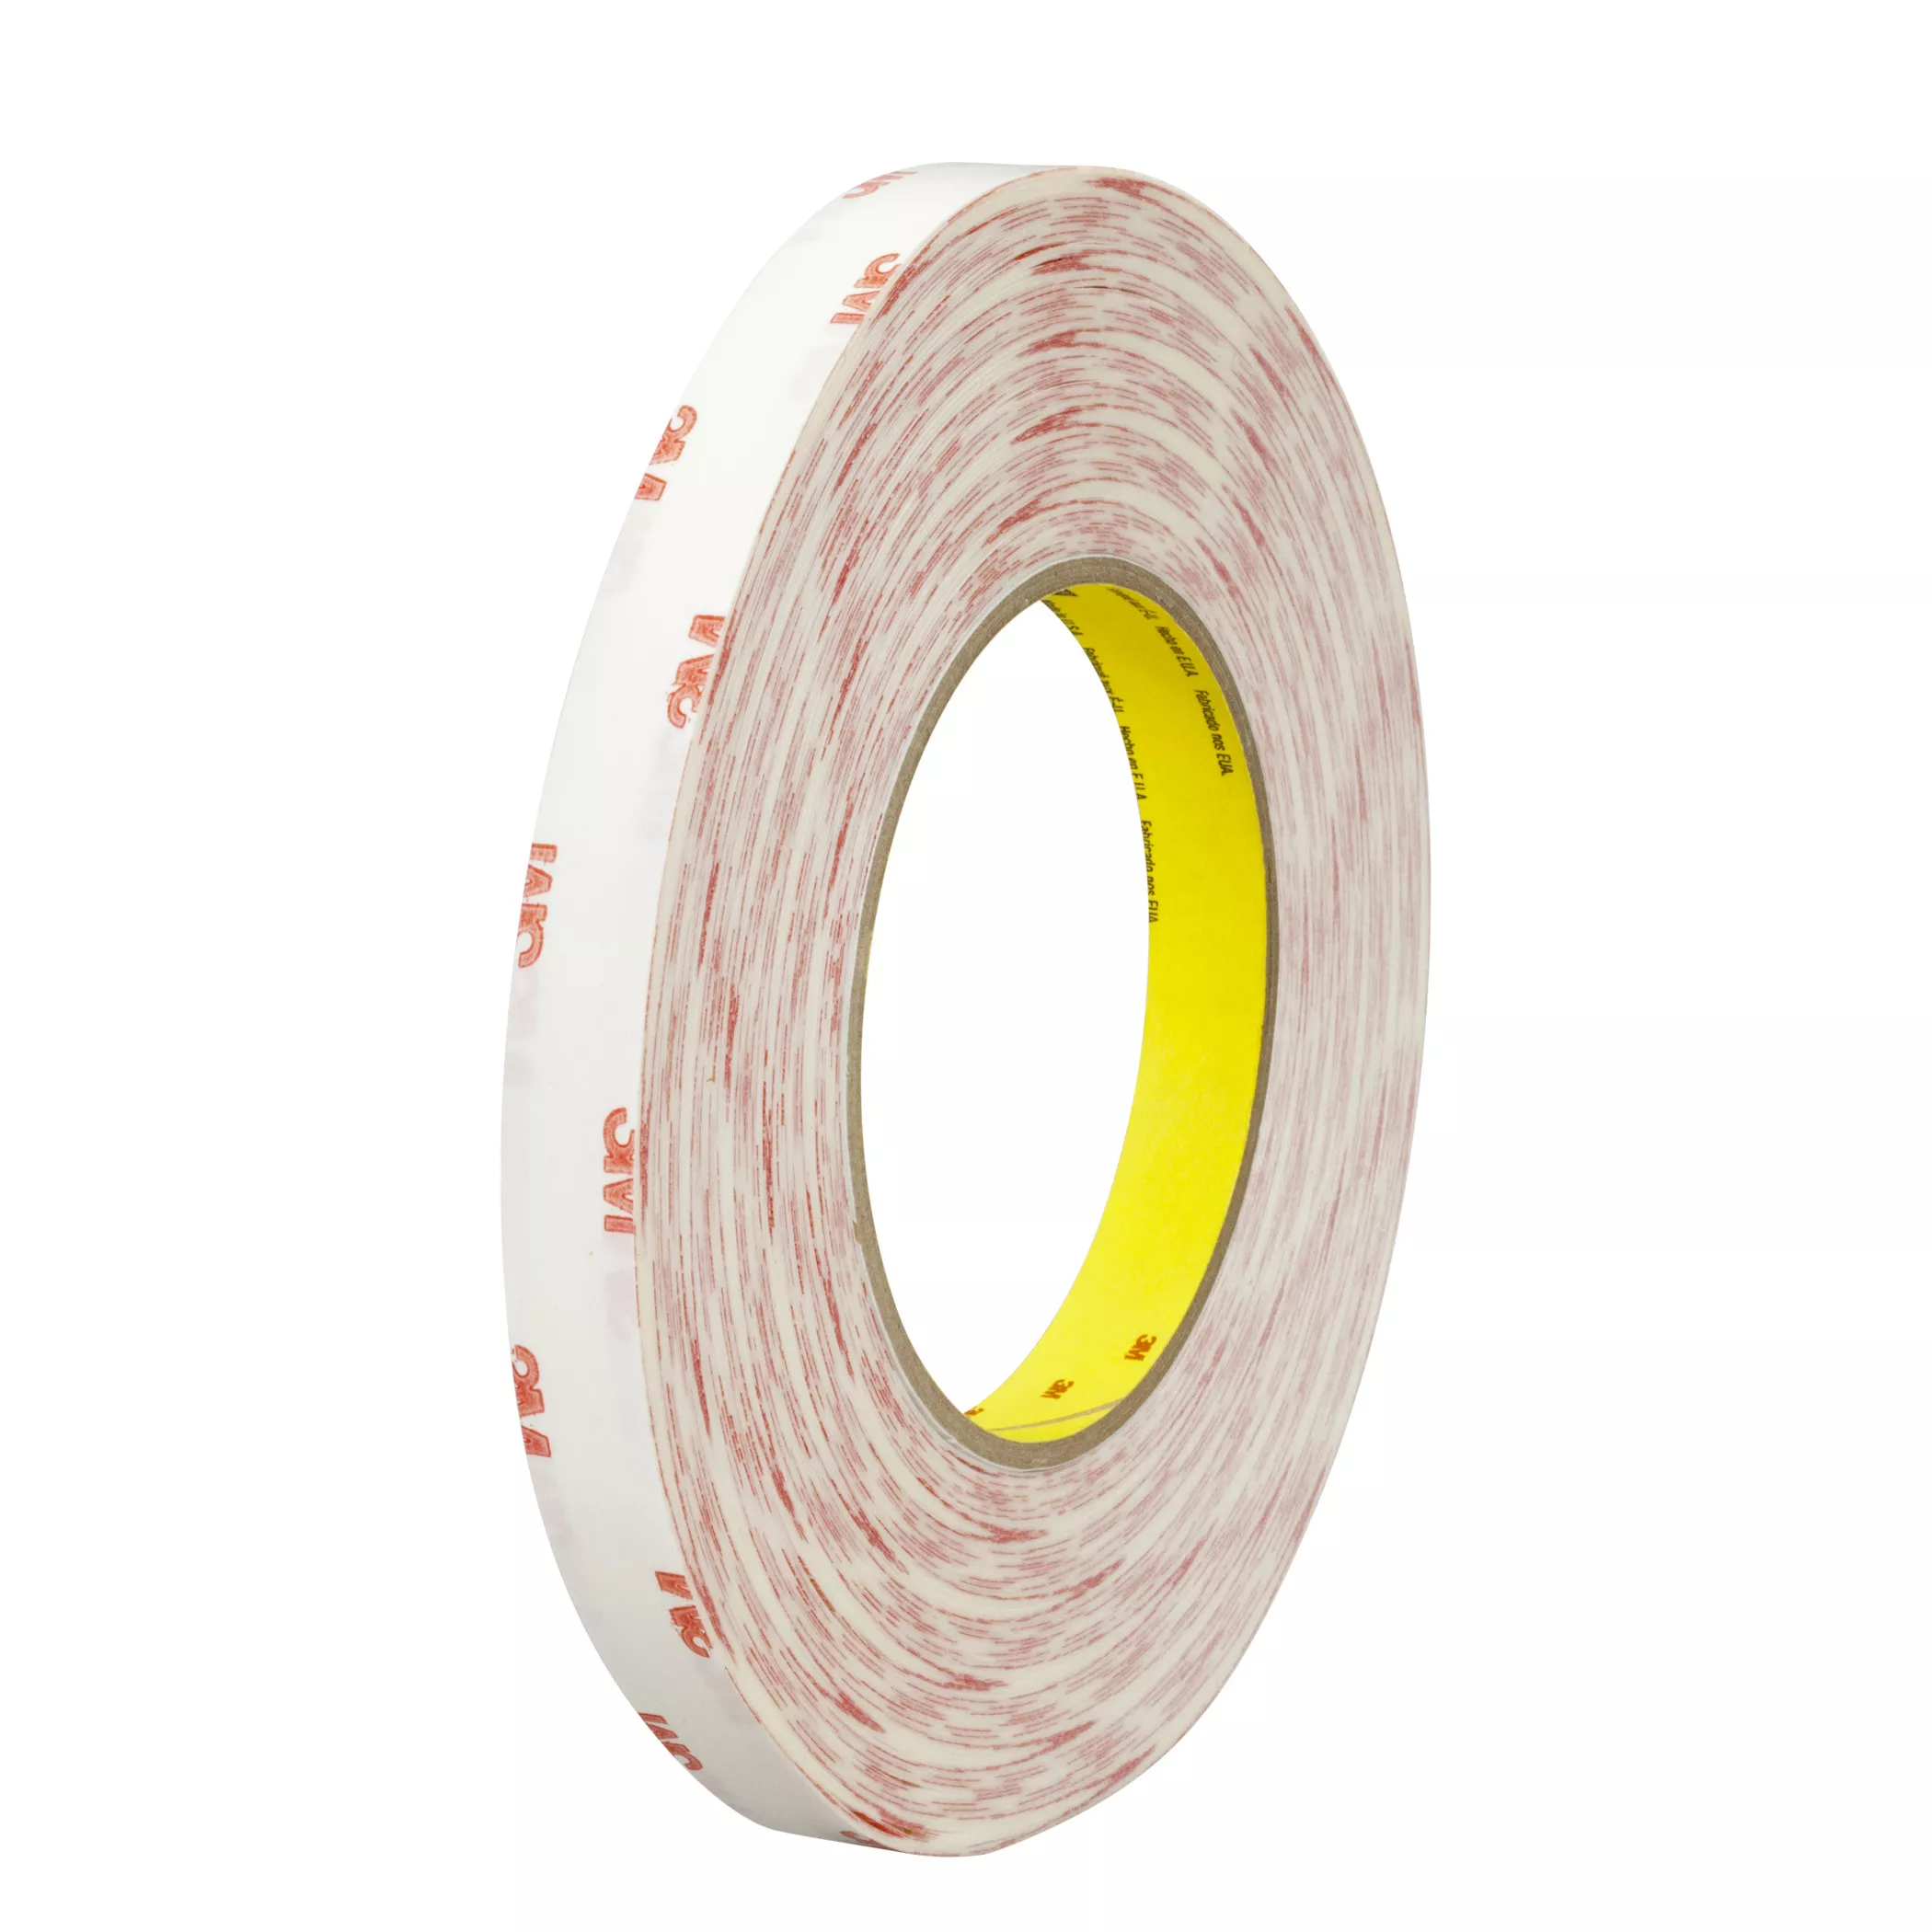 3M™ Double Coated Tissue Tape 9456, Clear, 1 in x 72 yd, 4 mil, 36
Roll/Case